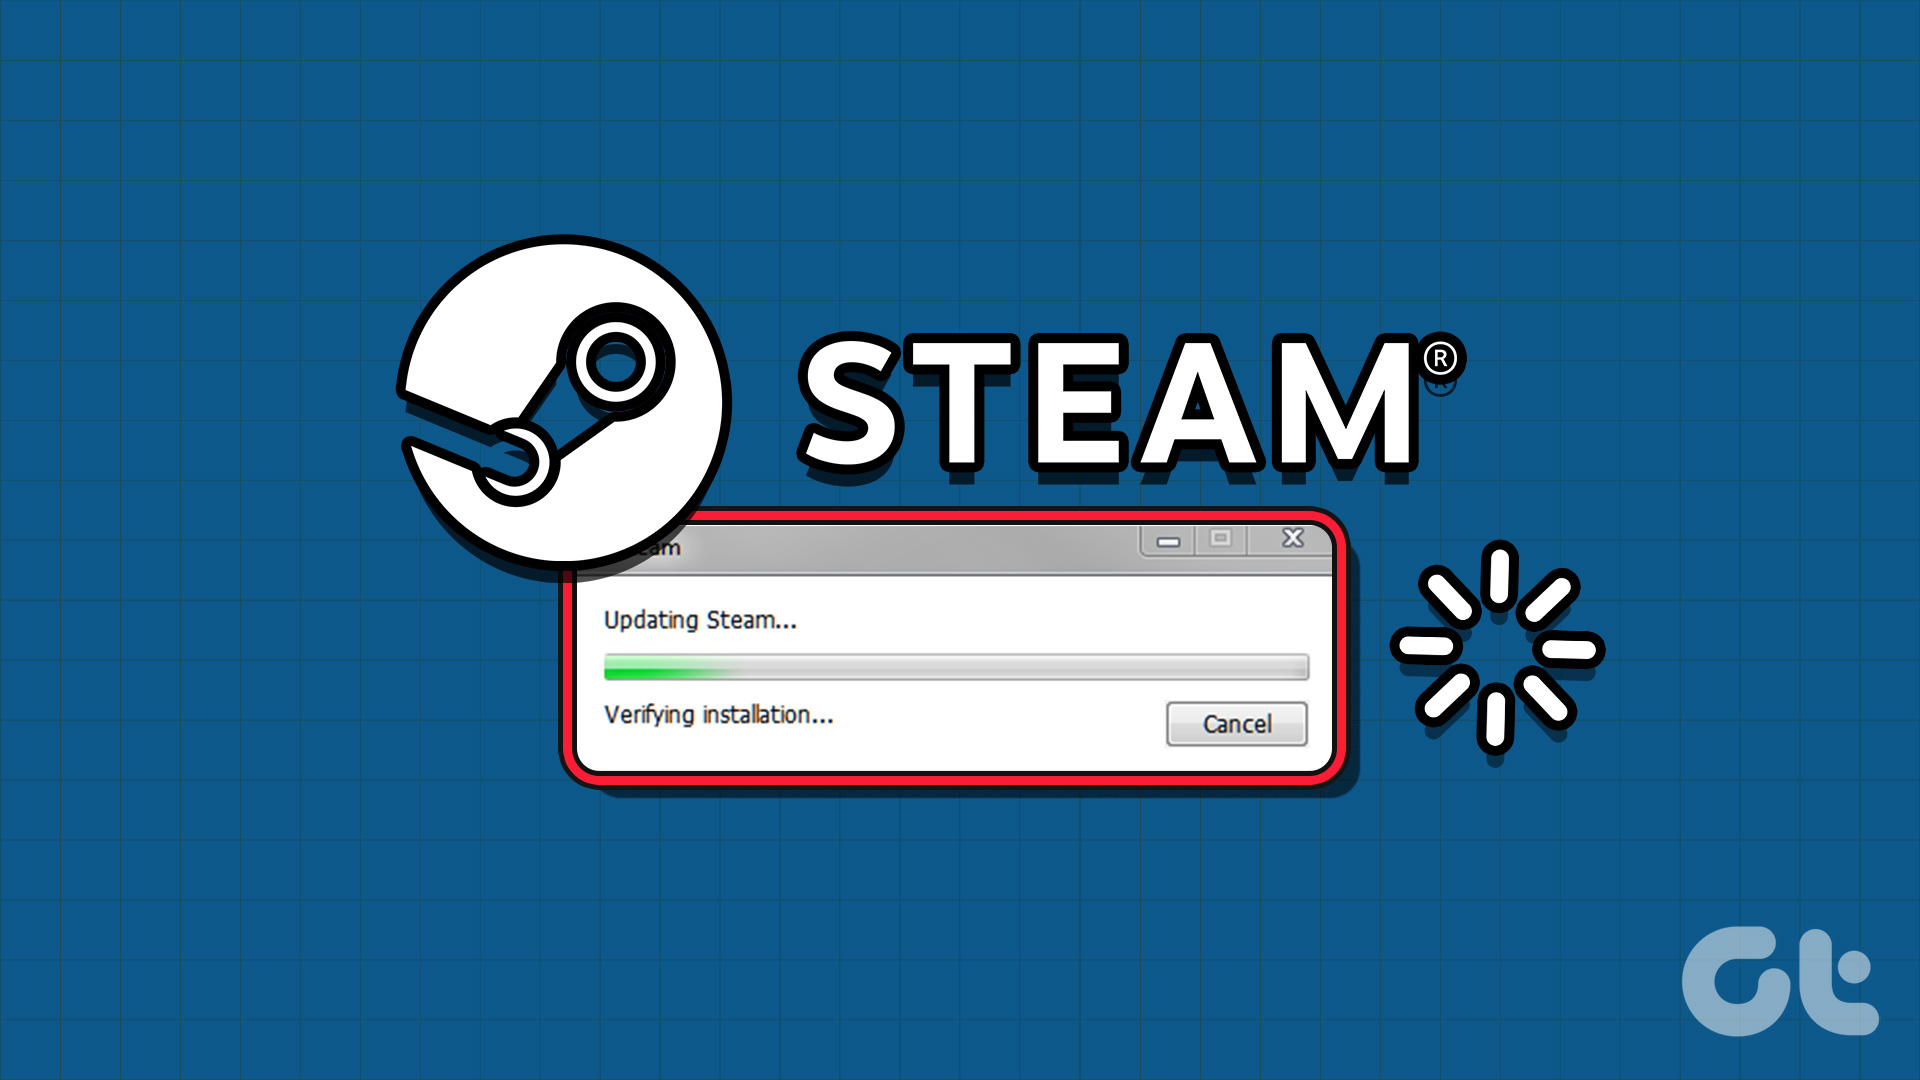 Verifying email address steam фото 30